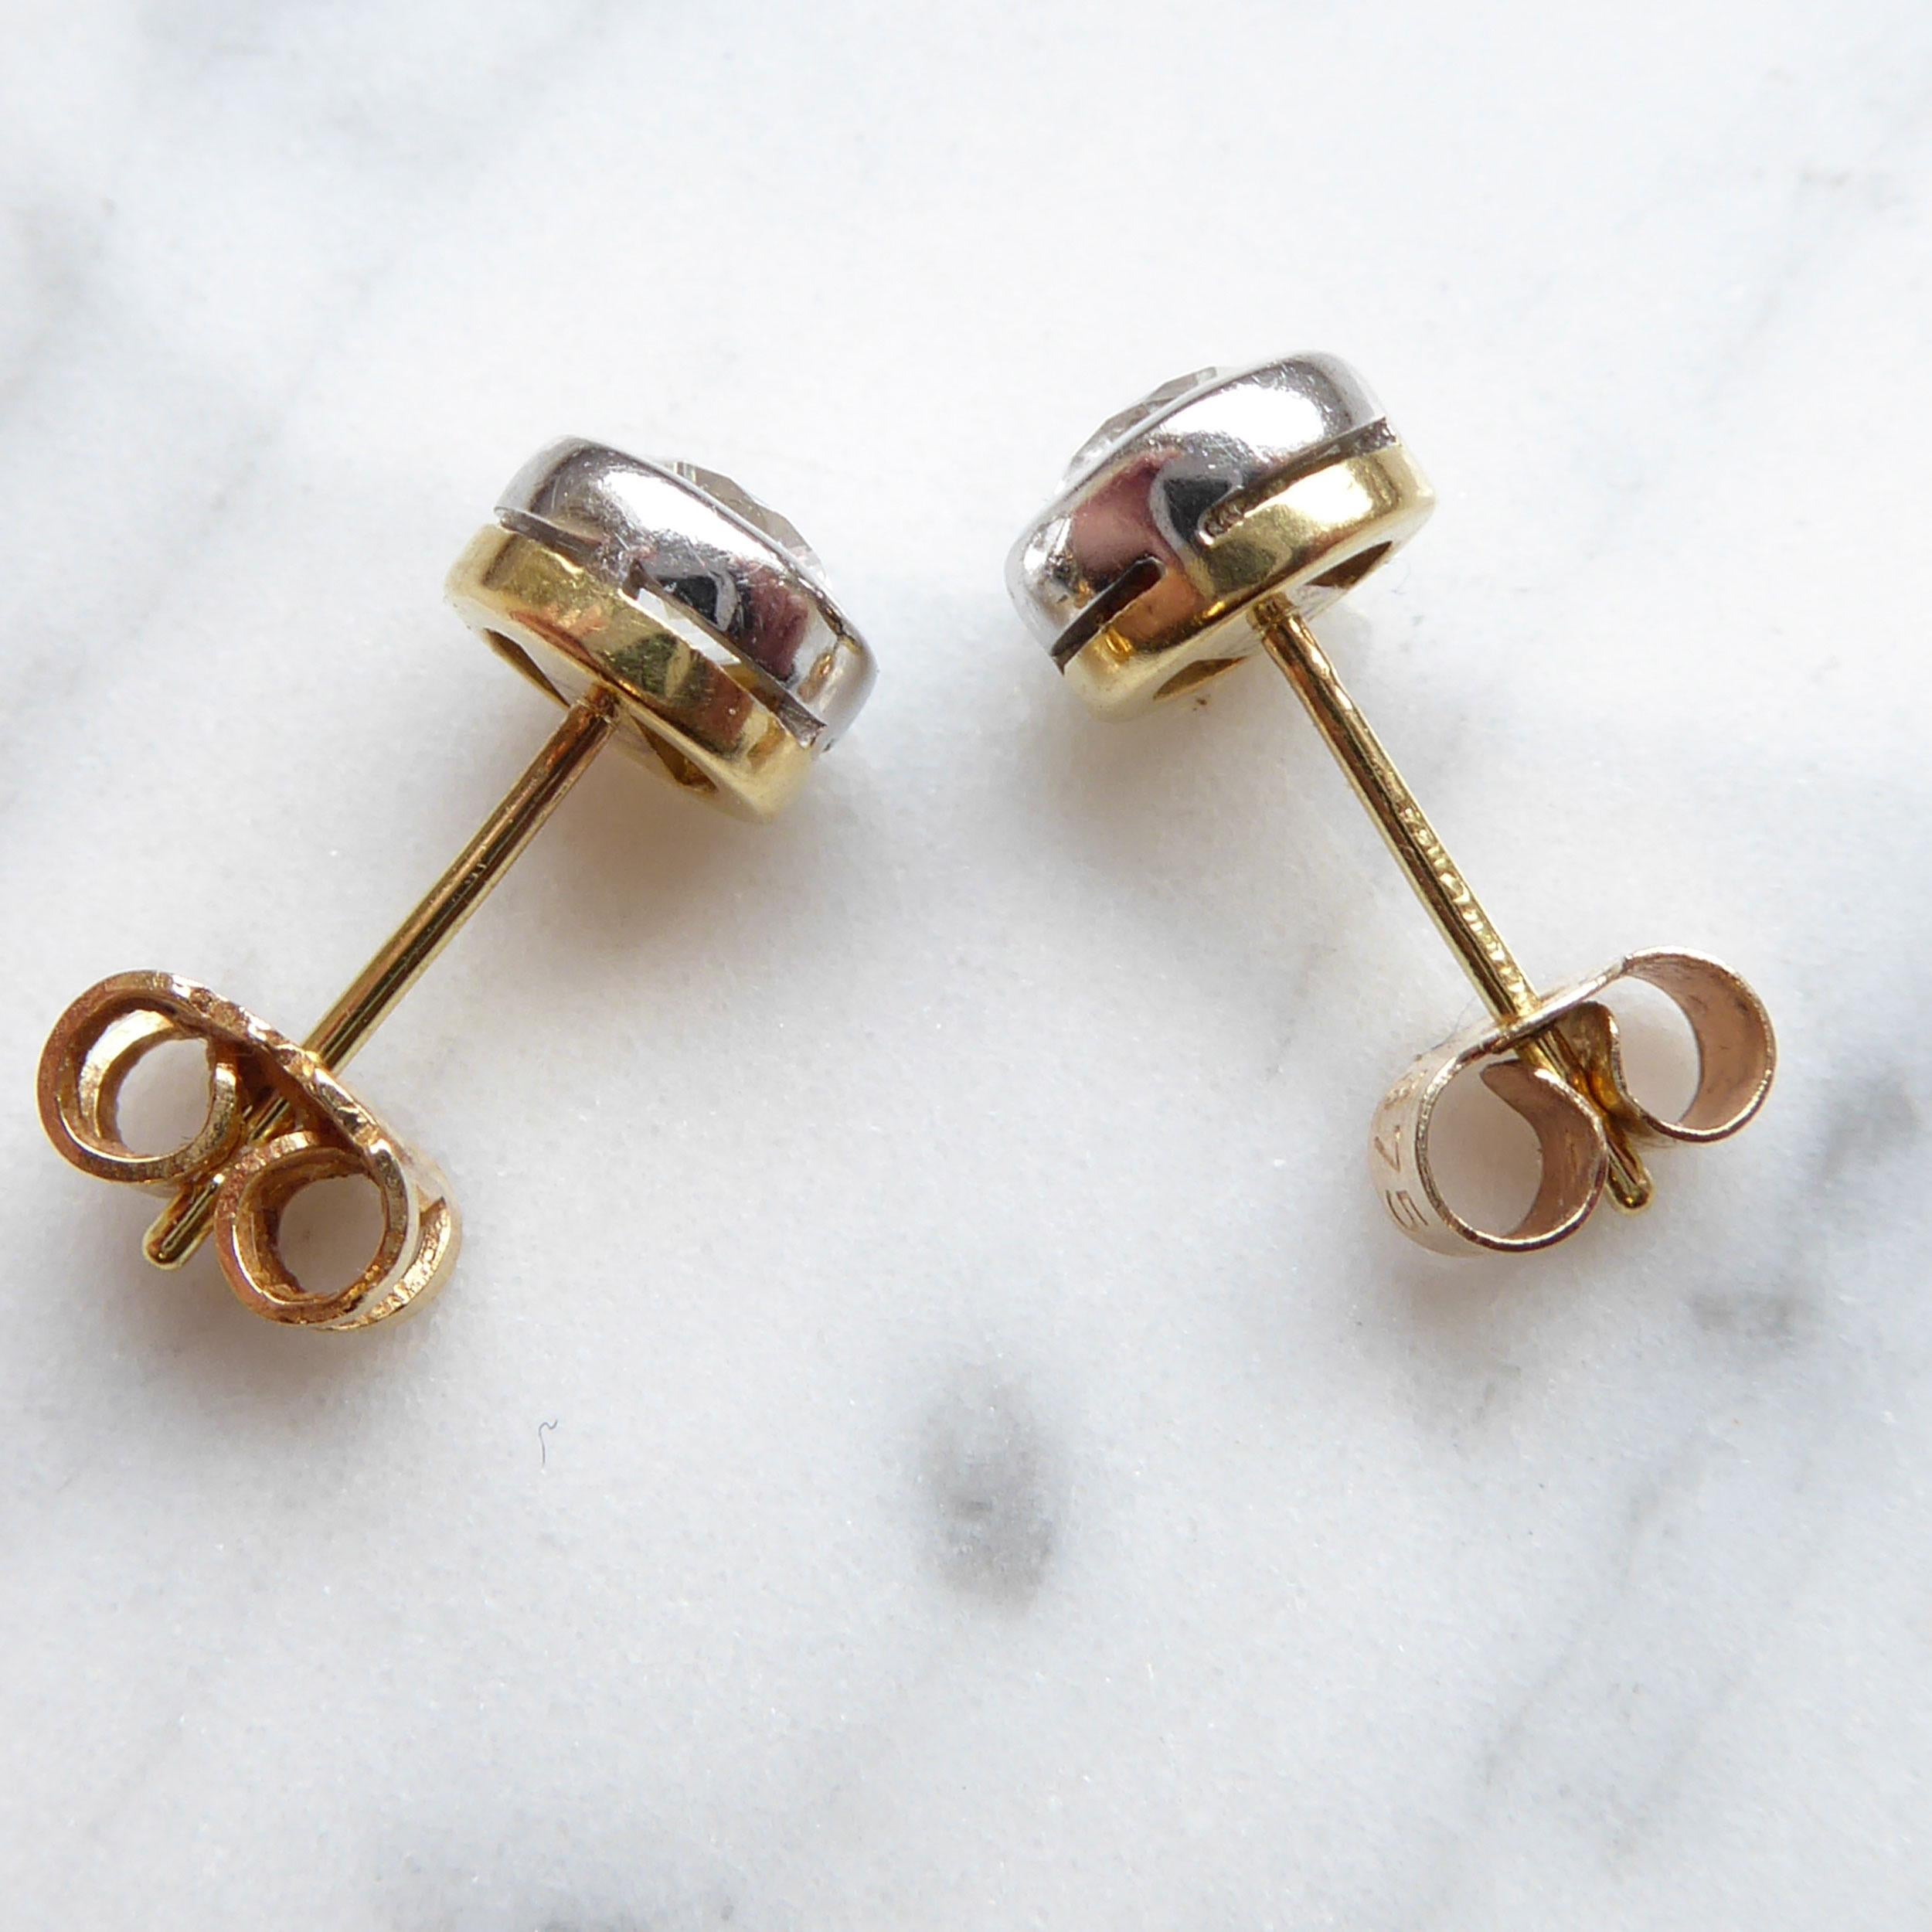 1.07 Carat Diamond Stud Earrings, 18 Carat Gold, London, 2000 In Good Condition In Yorkshire, West Yorkshire